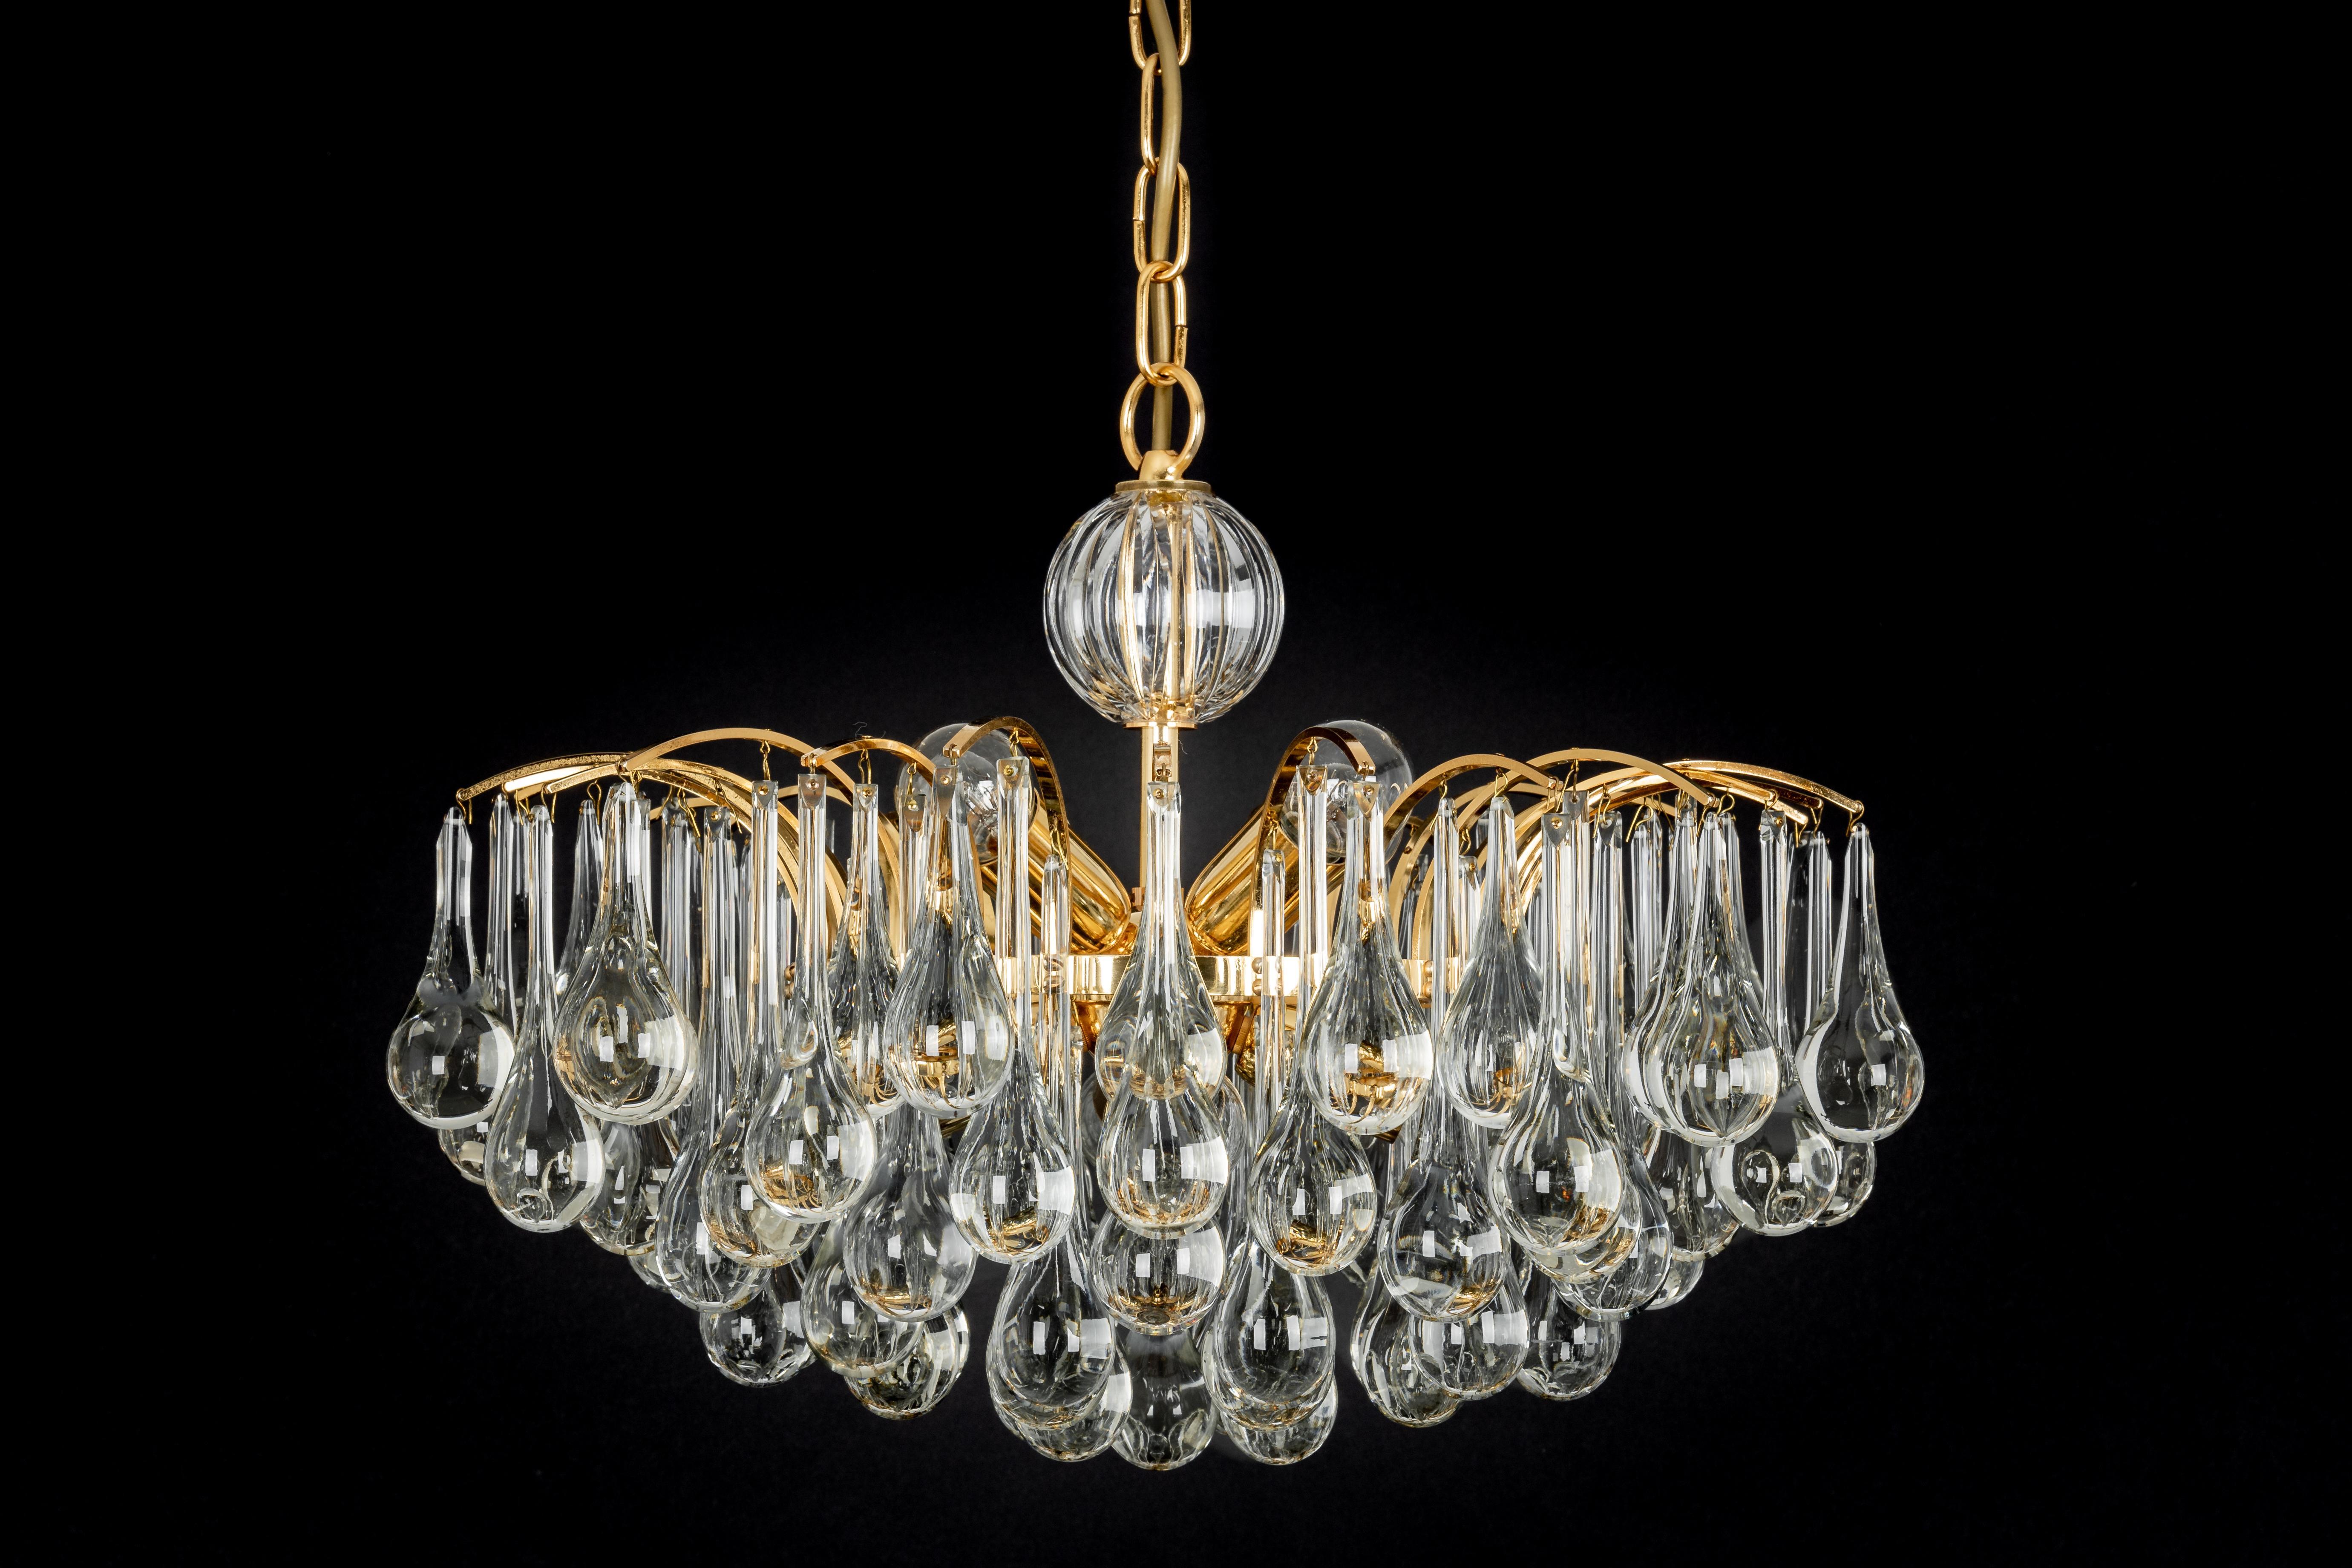 1 of 2 Large Murano Glass Tear Drop Chandelier, Christoph Palme, Germany, 1970s For Sale 7